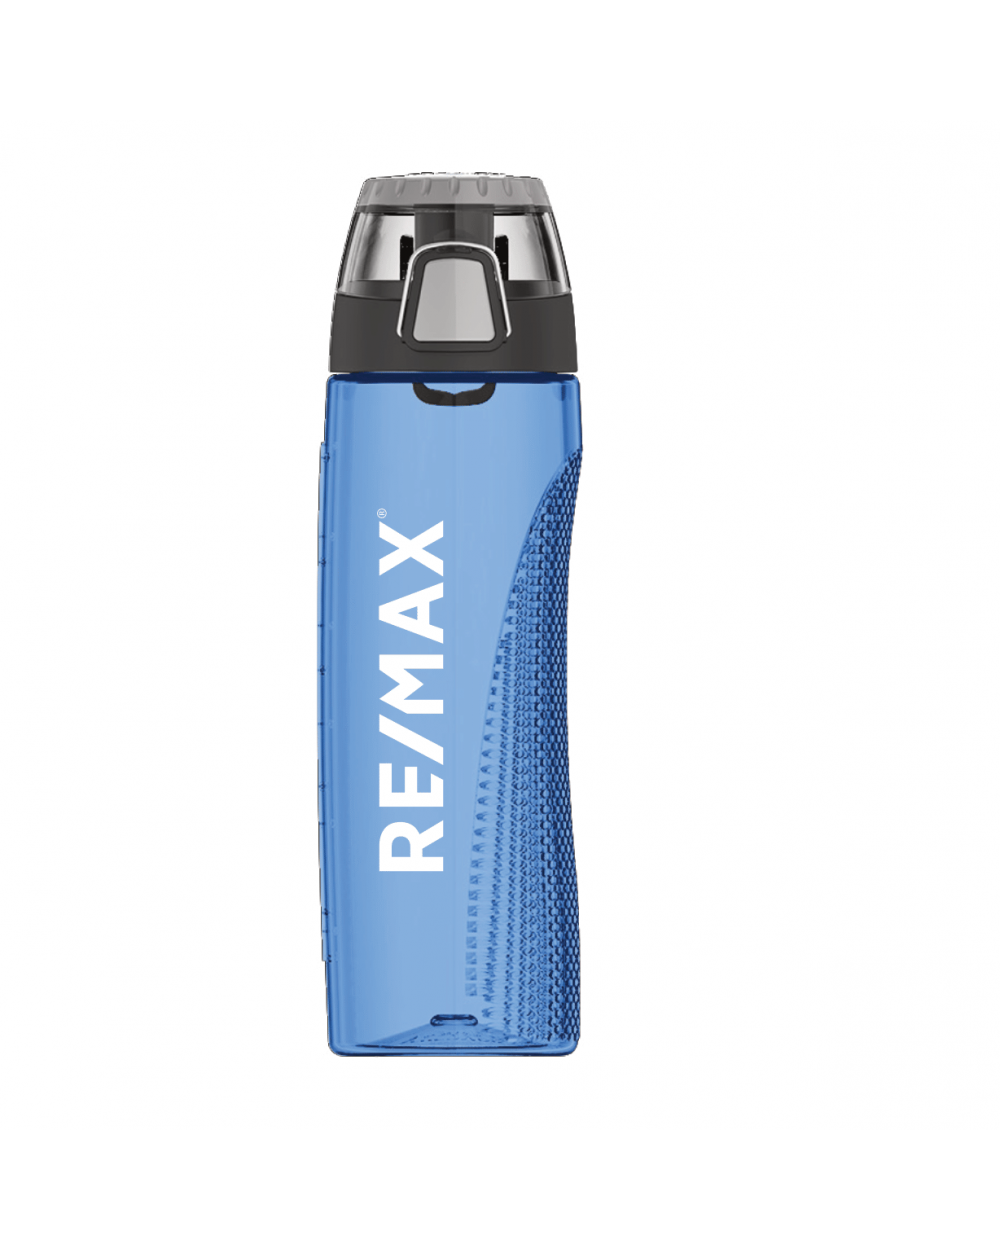 RE/MAX 24 oz. Thermos® Hydration Bottle with Rotating Intake Meter